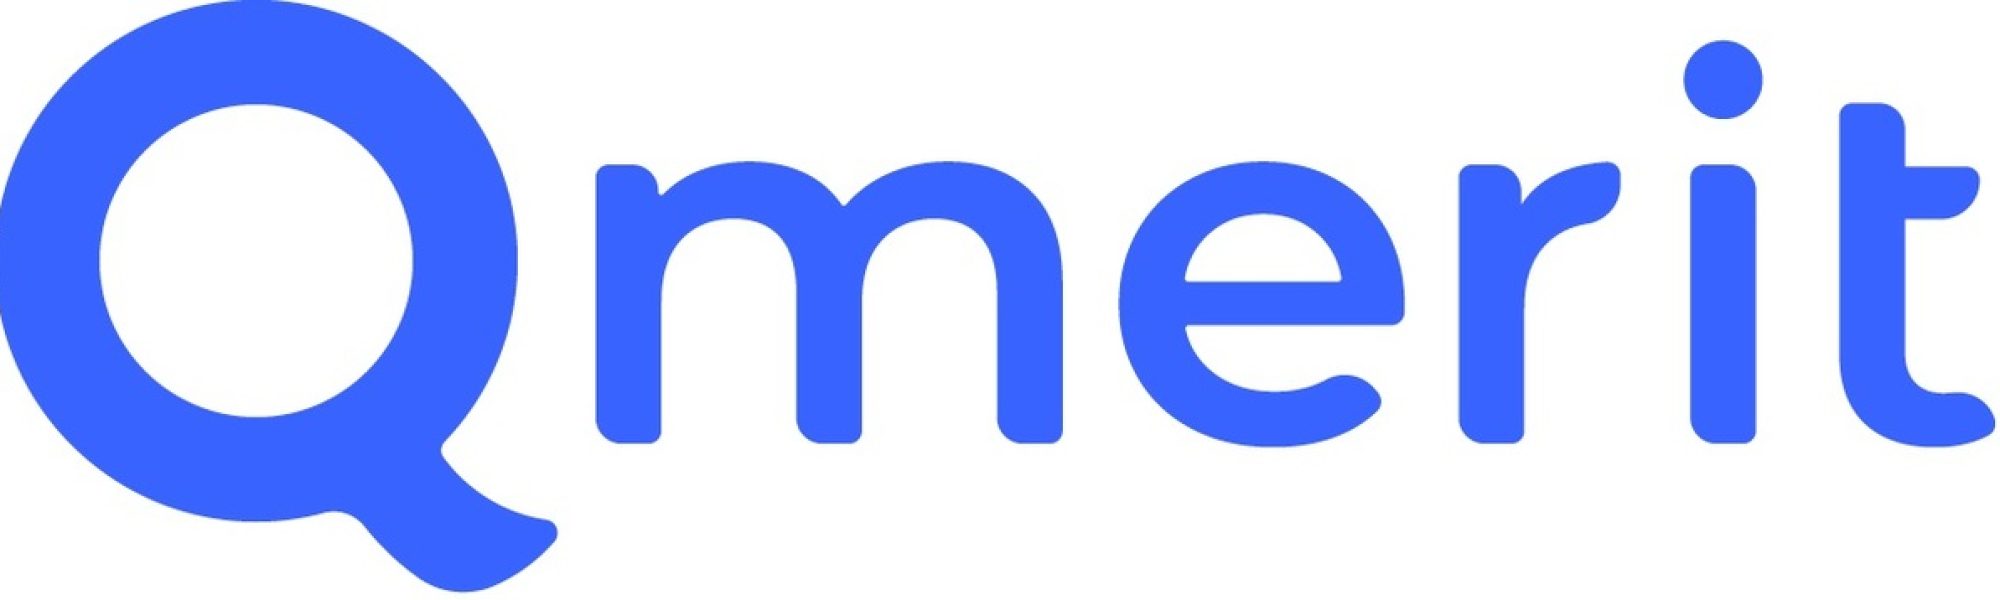 Qmerit Partners with Utilities to Accelerate Their Customers' Electrification Journey